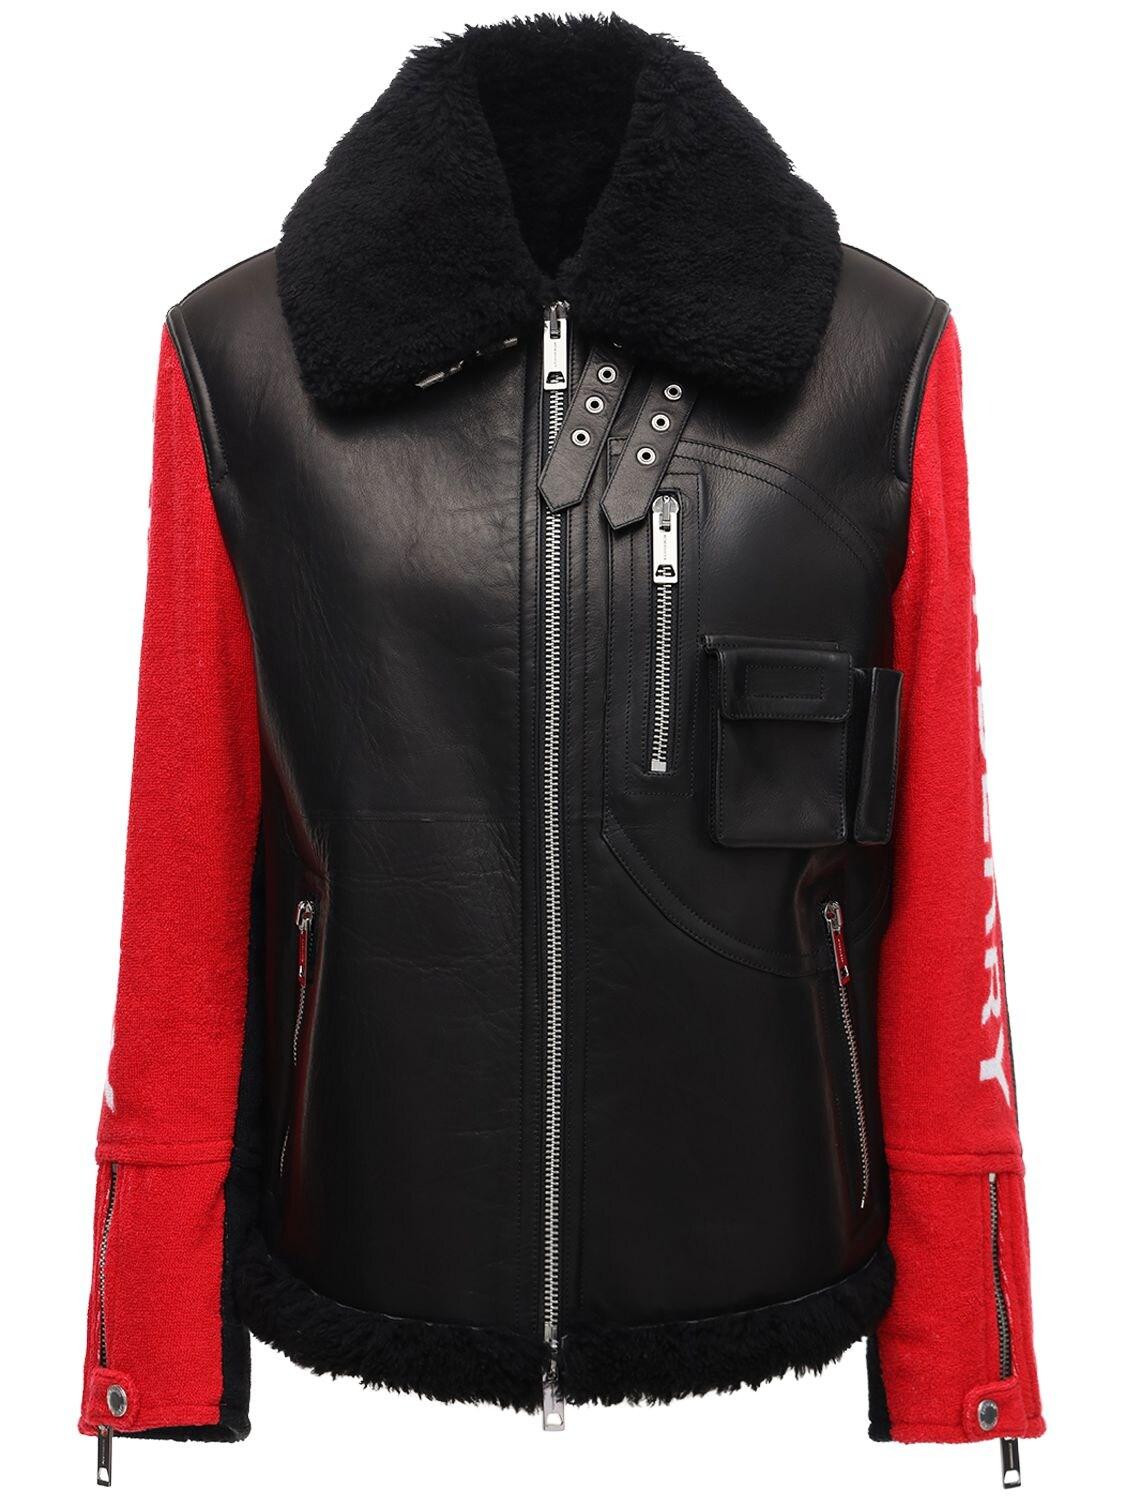 Burberry Paneled Leather, Shearling And Cotton-terry Jacket in Black/Red  (Black) - Save 43% | Lyst